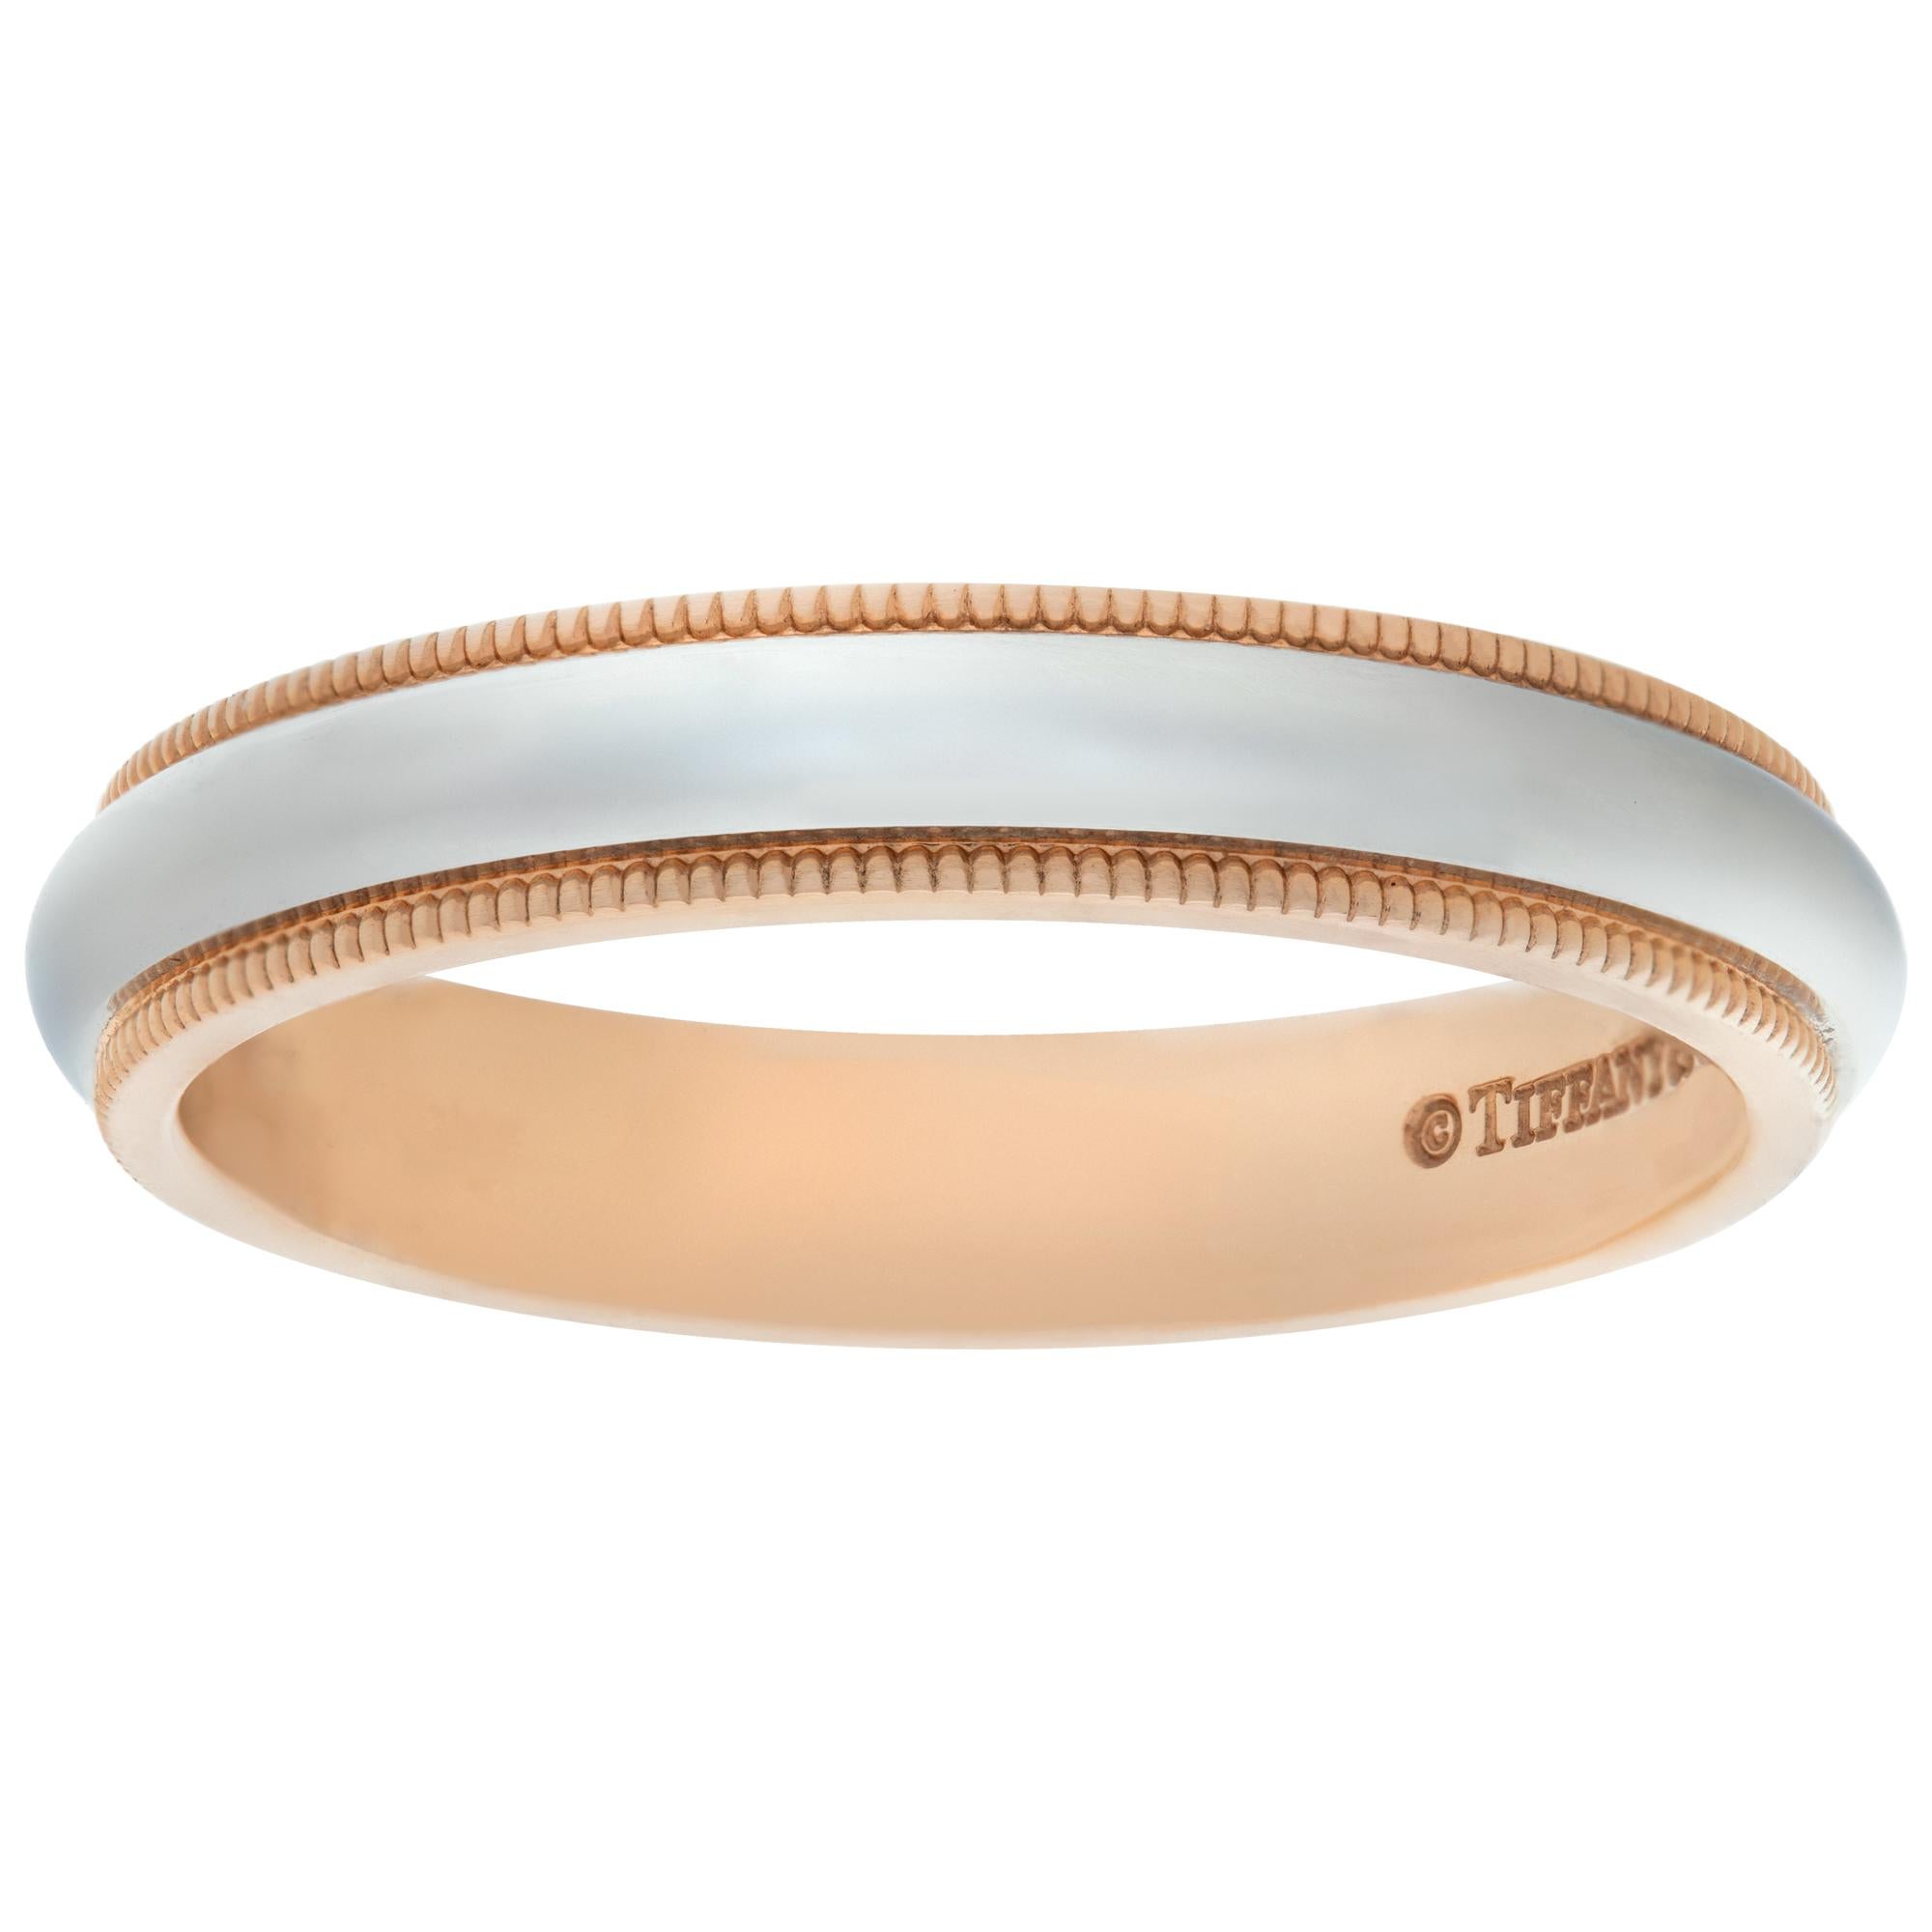 Tiffany & Co. rose gold and platinum wedding band. For Sale